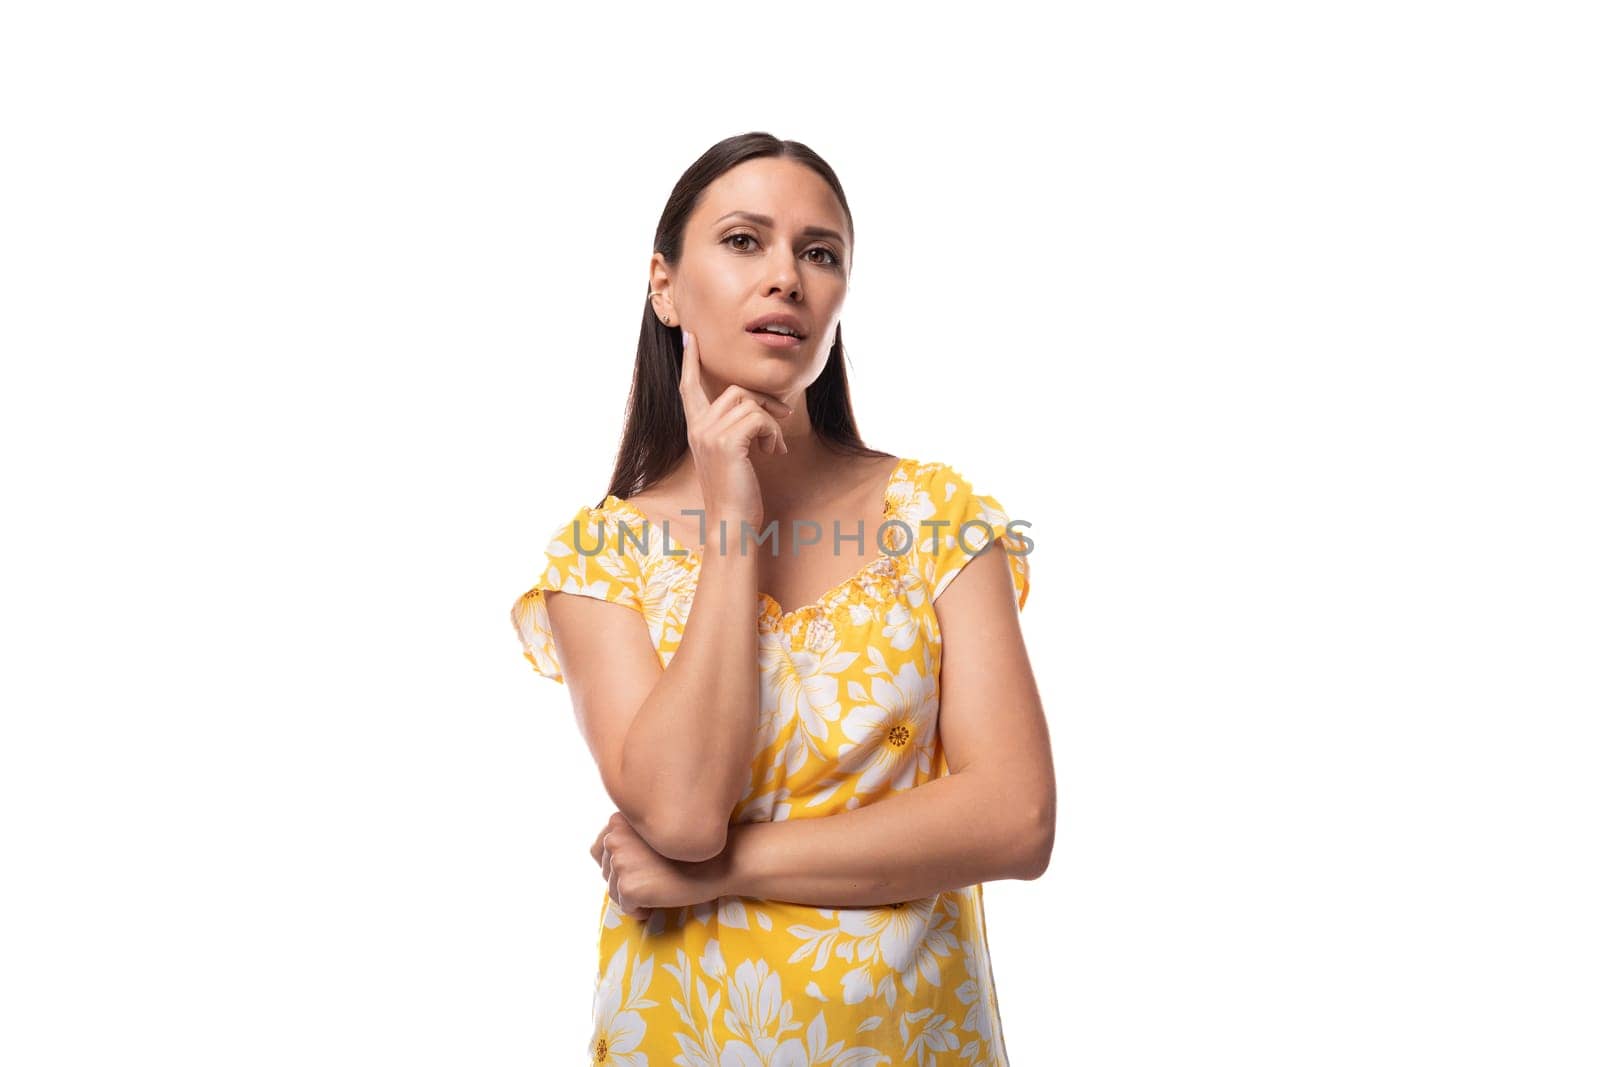 european confident brunette lady with loose hair wearing a yellow t-shirt on a white background with copy space.